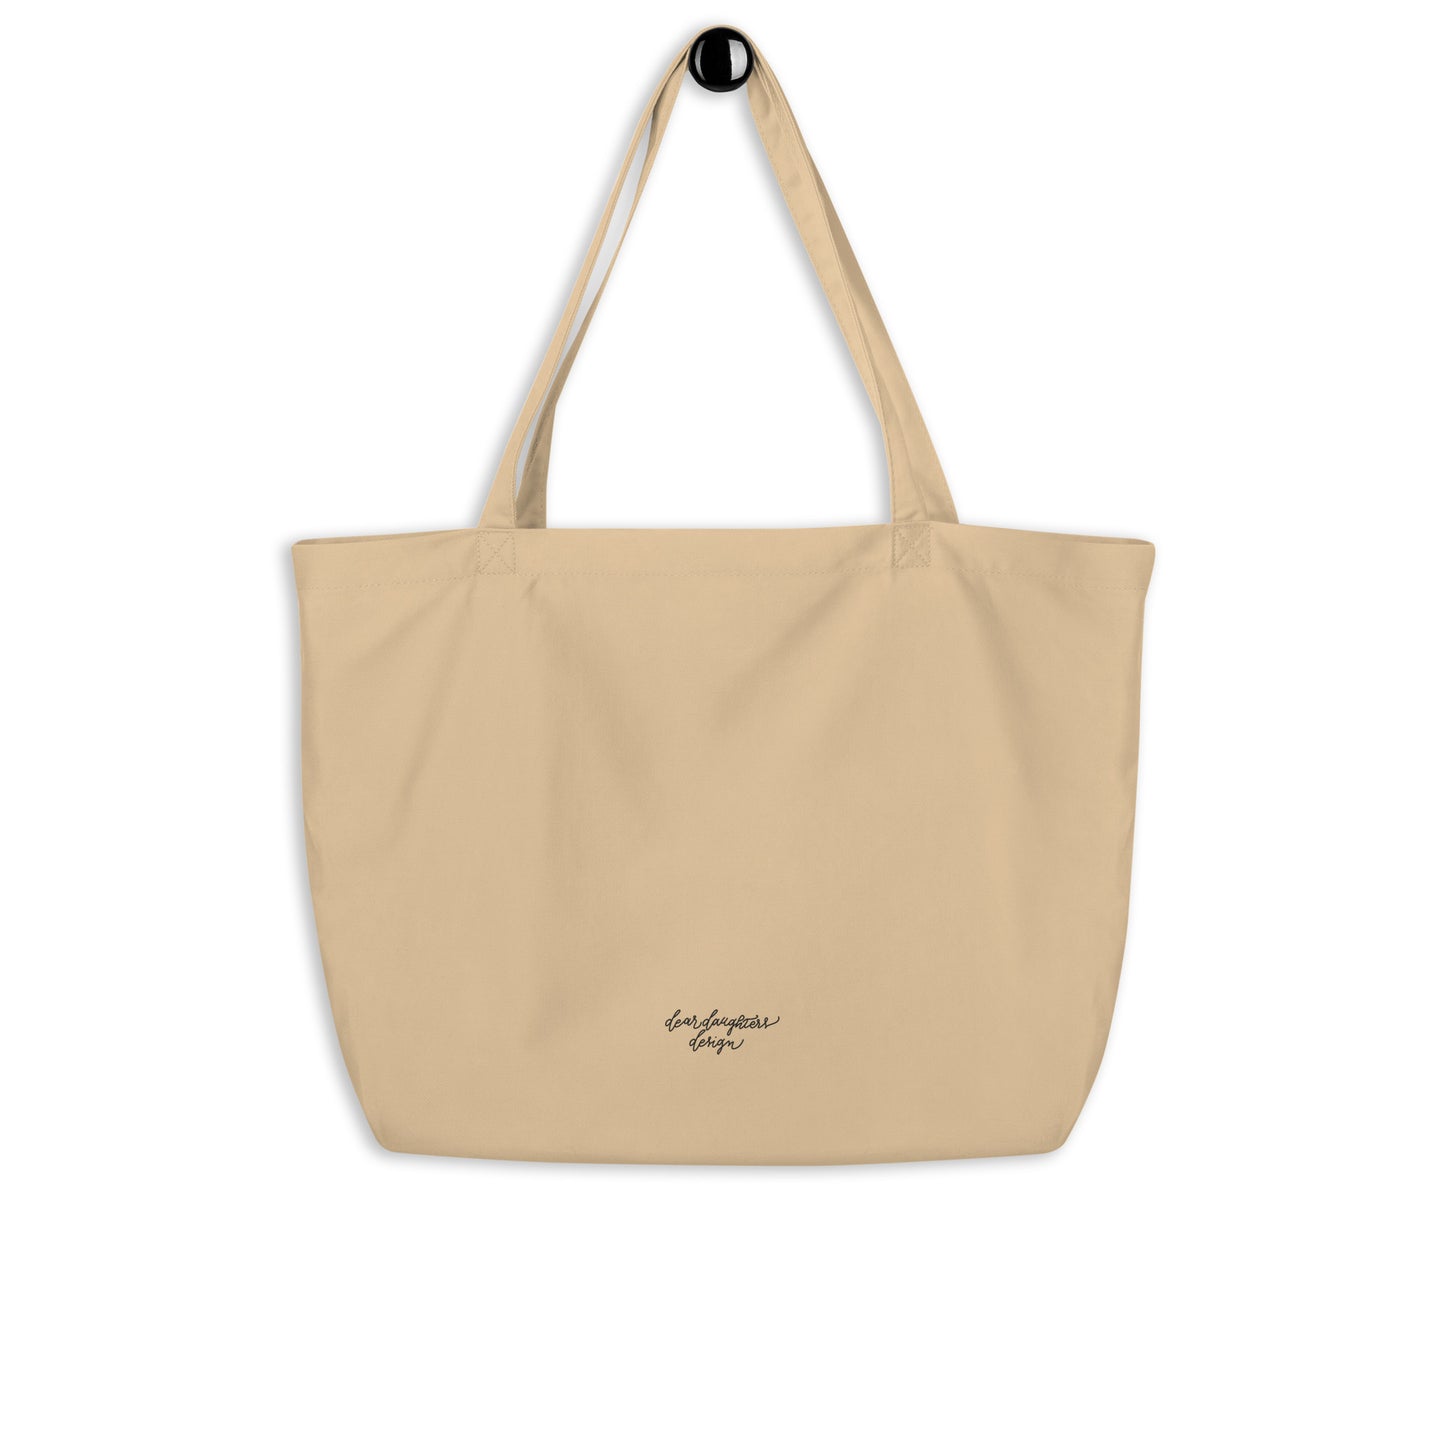 Script "Strong" Calligraphy Printed on Certified Organic Cotton Canvas Large Eco Tote Bag